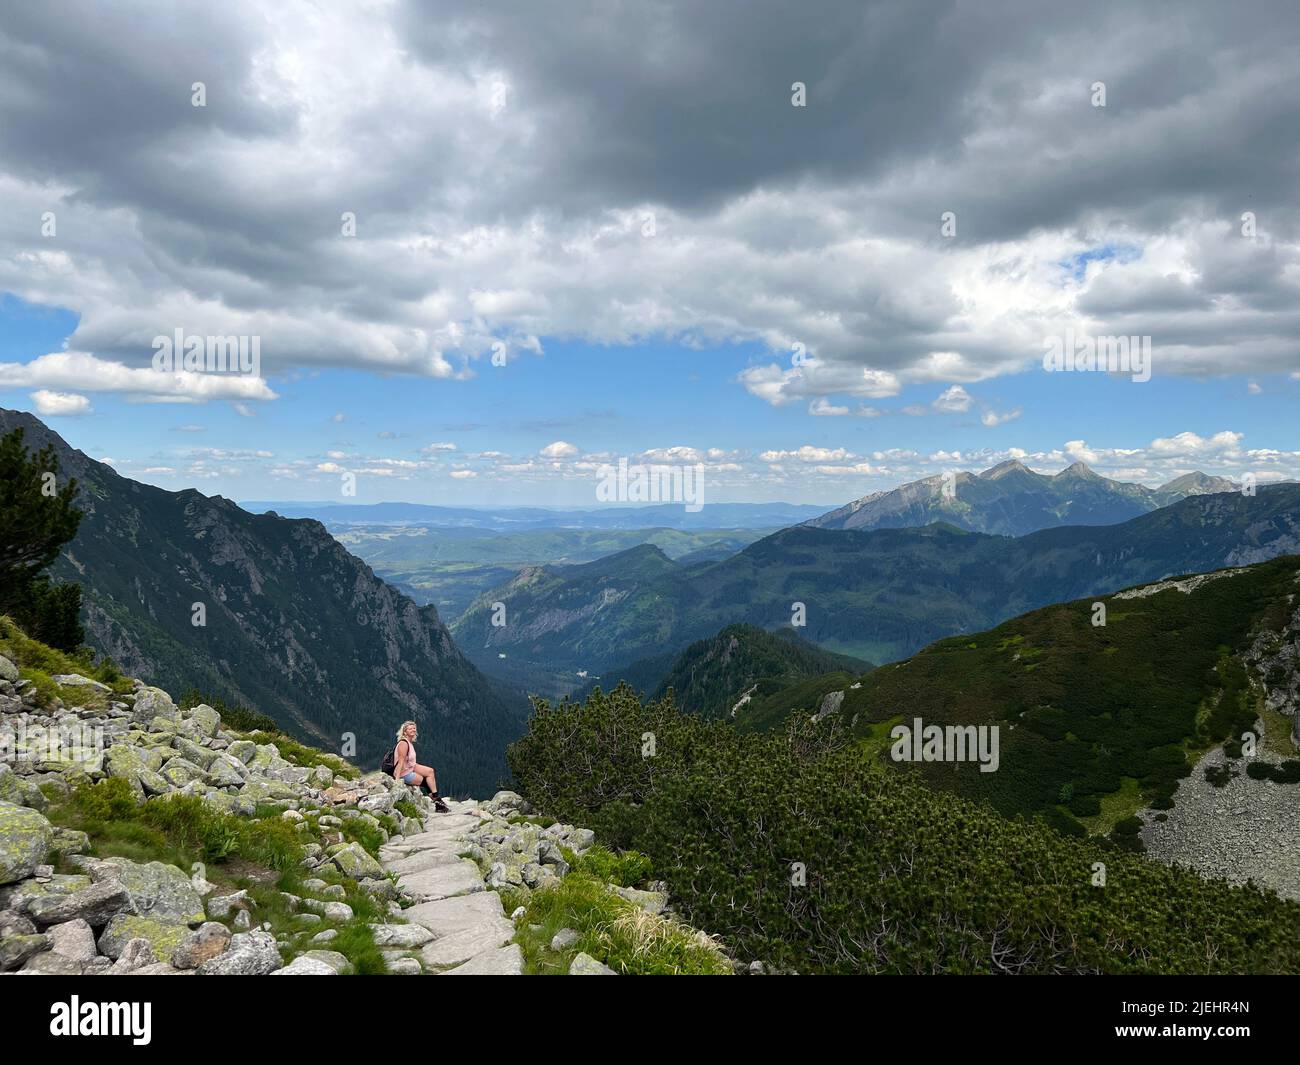 Panoramic scenic view of moutains in Zakopane, Poland with one blond woman relaxing on a hill in the background. Active life concept. Hiking in the mo Stock Photo